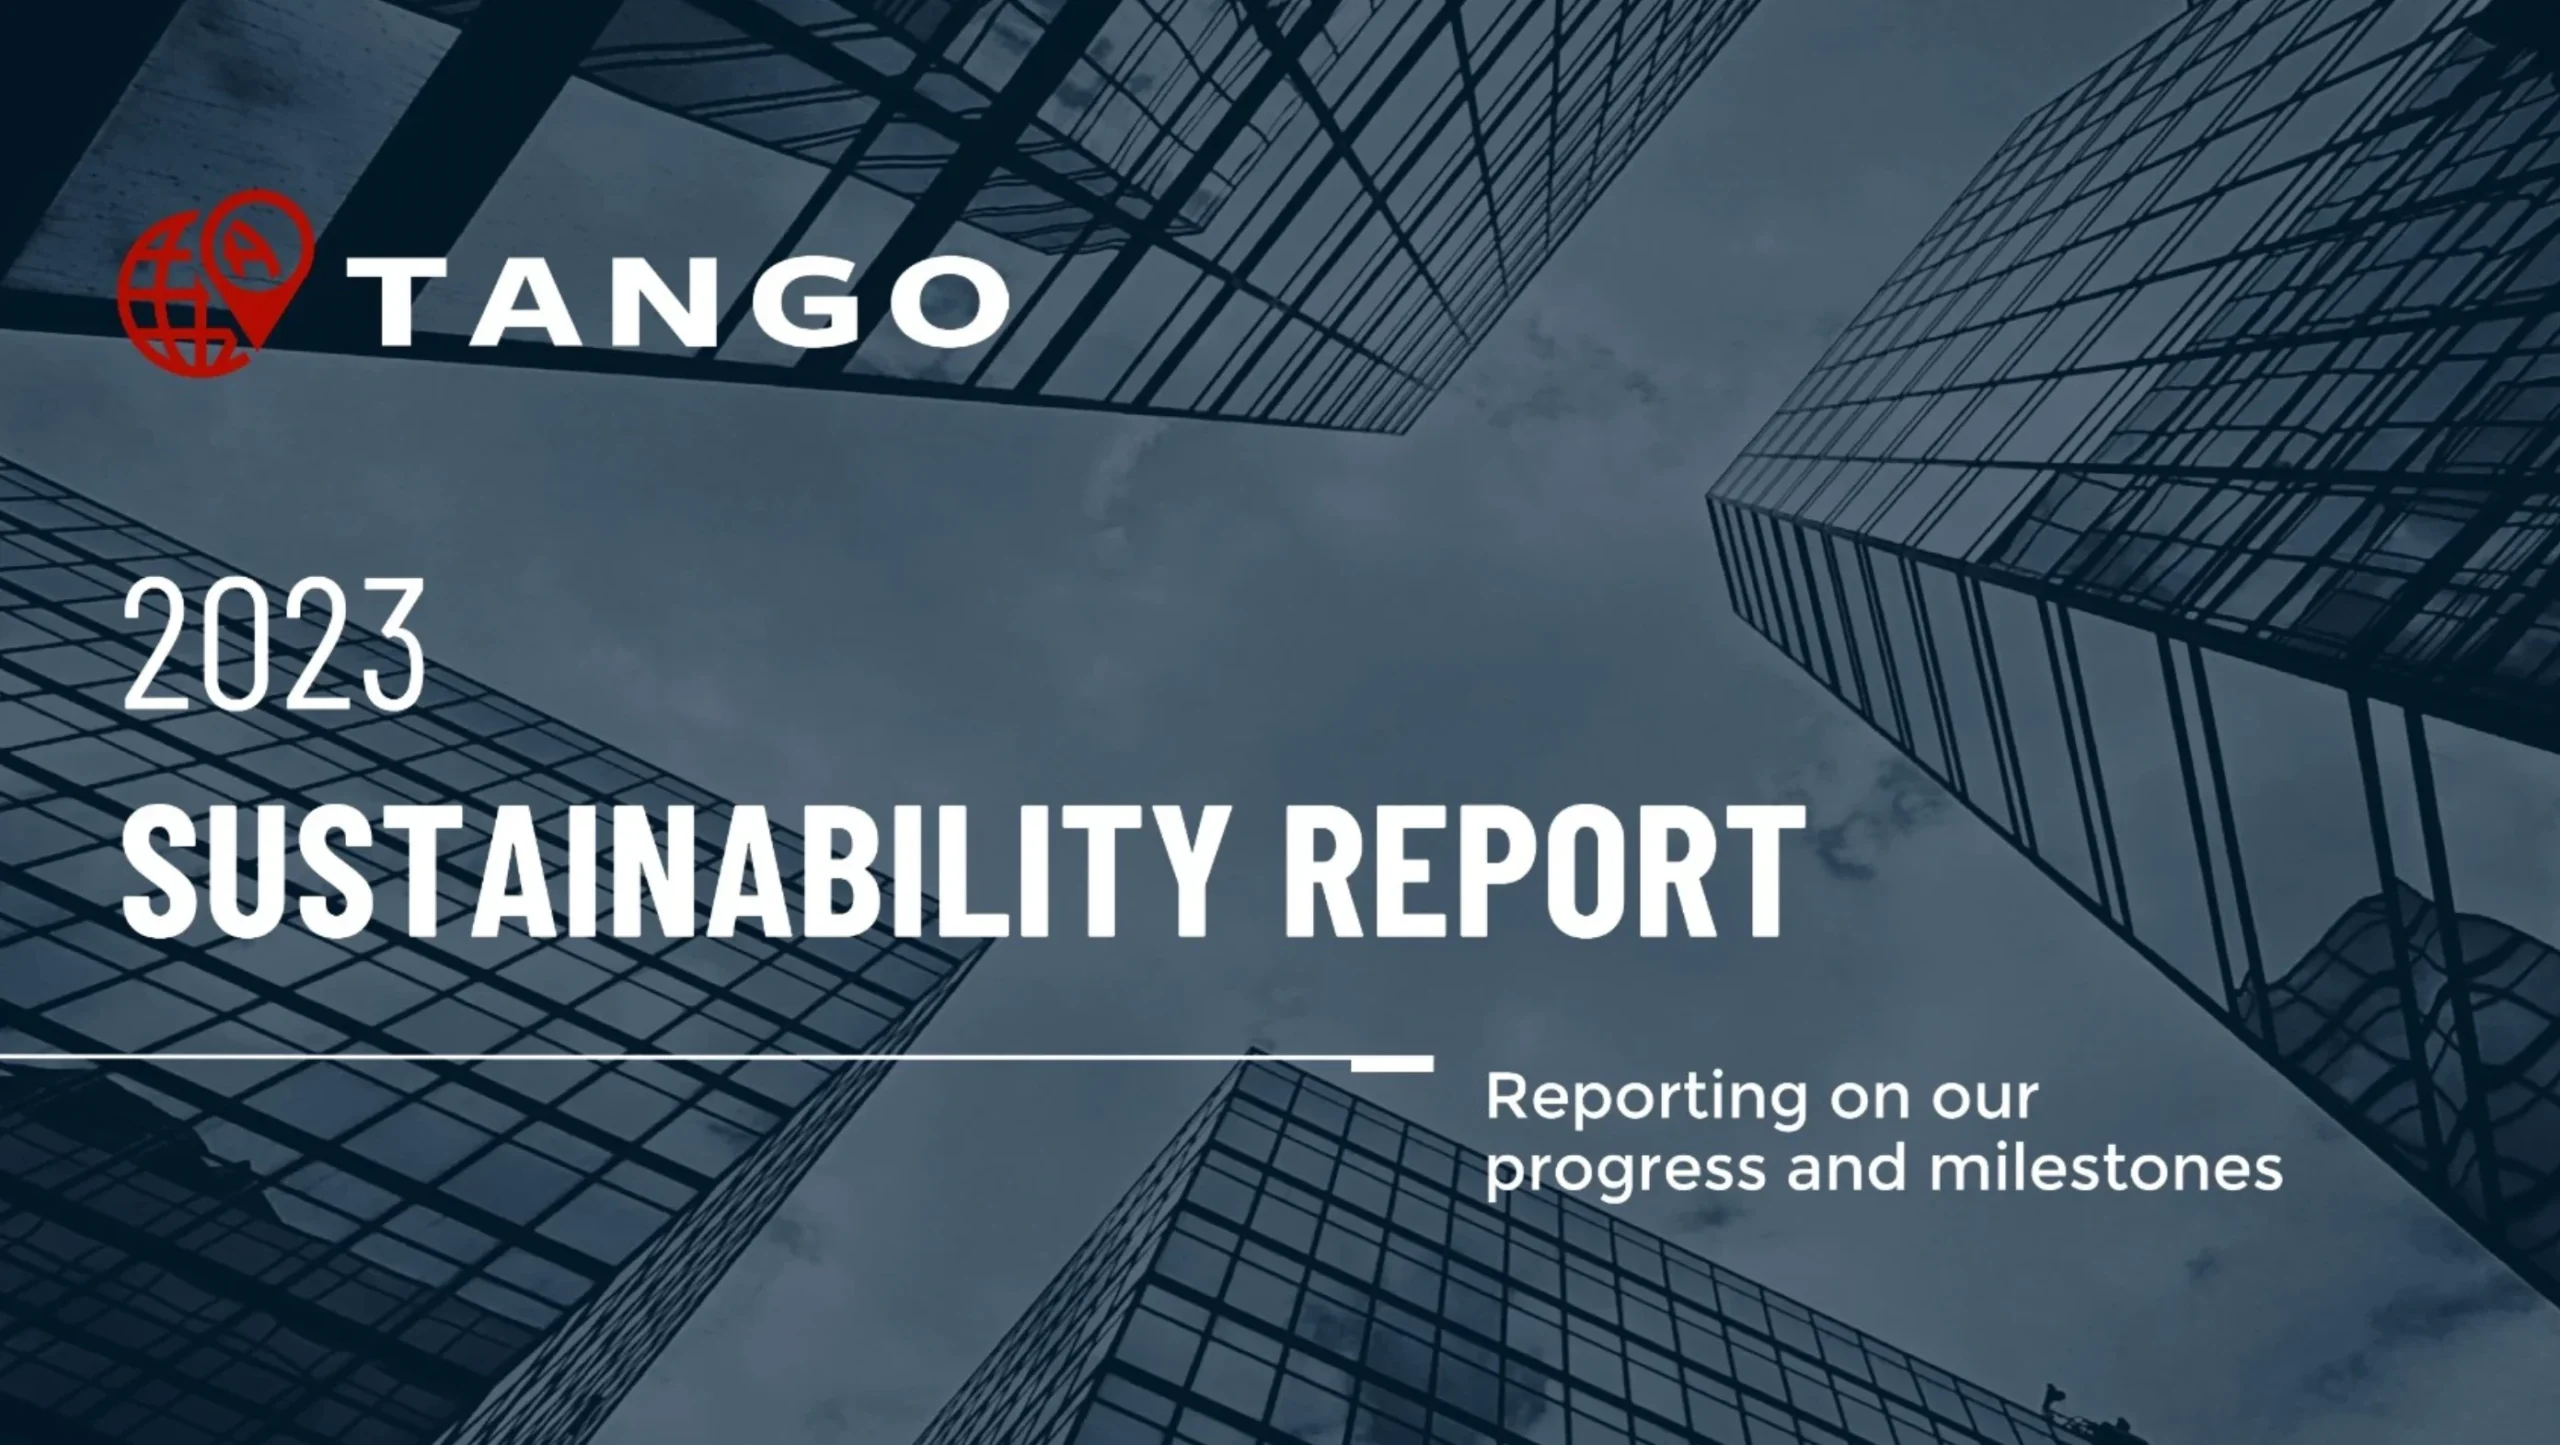 Technology provider releases first sustainability report